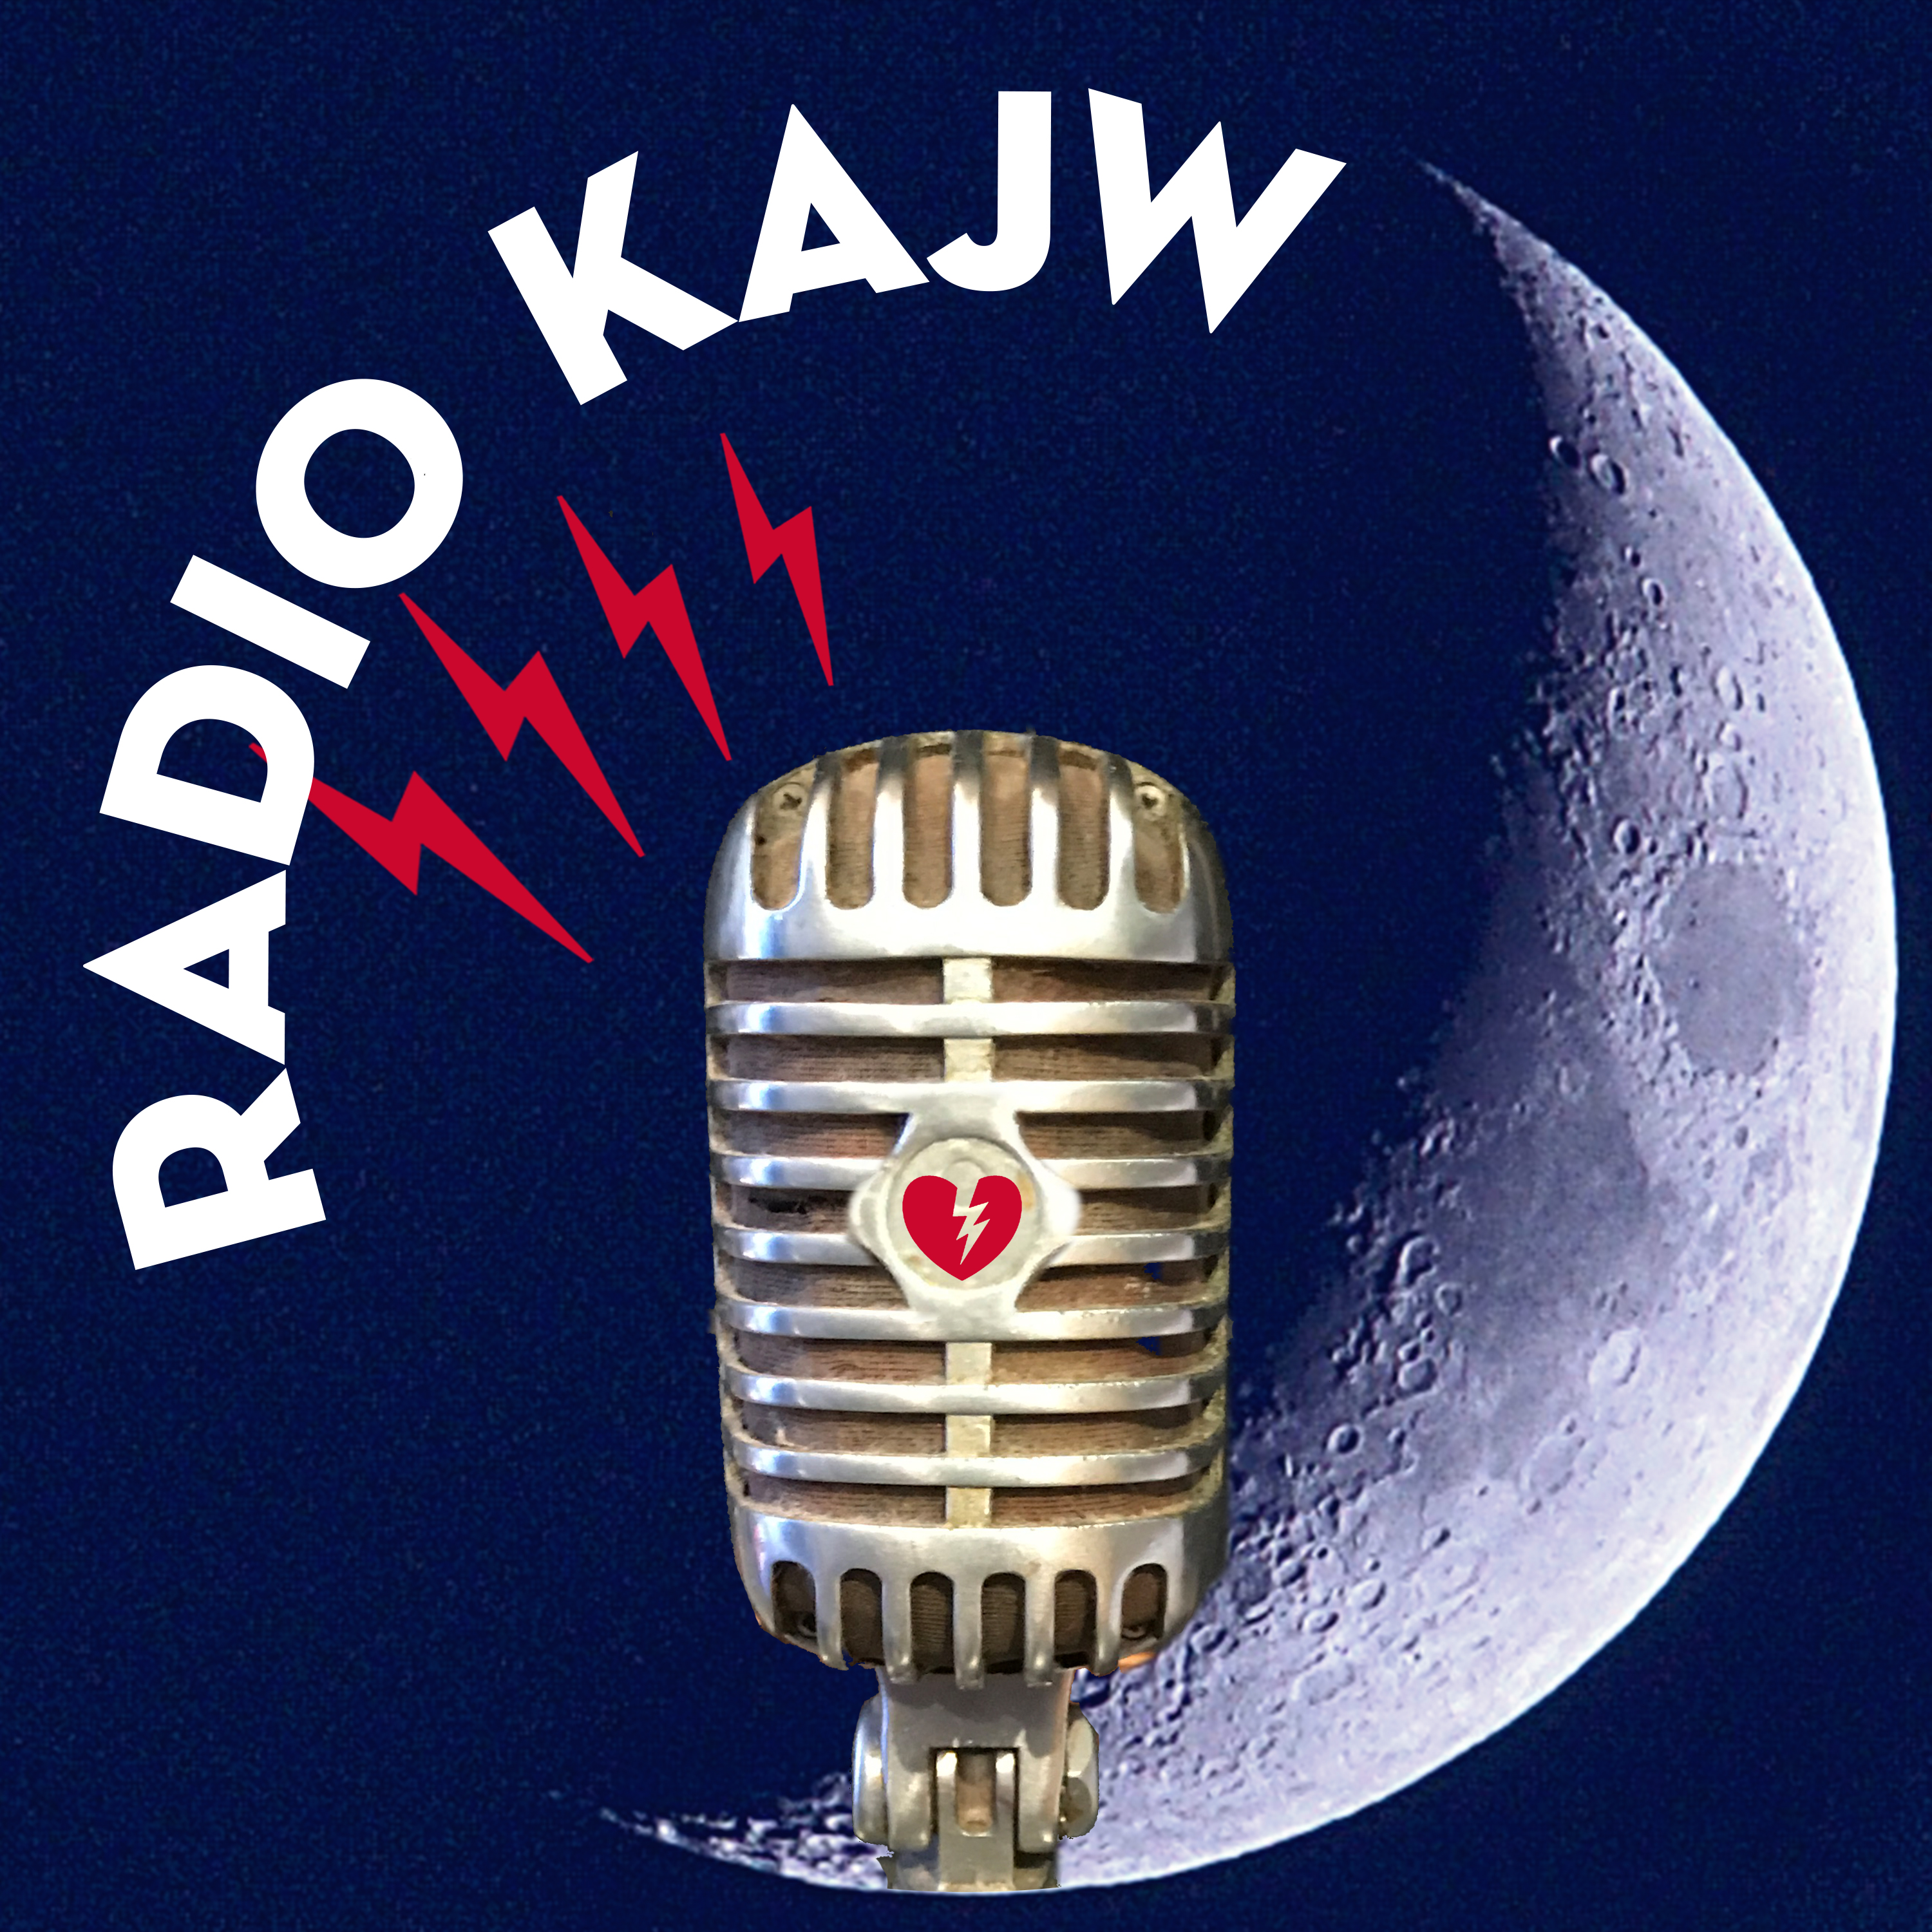 Art for Station ID 13 M1N-D.Thank you so very much for listening by RadioKAJW